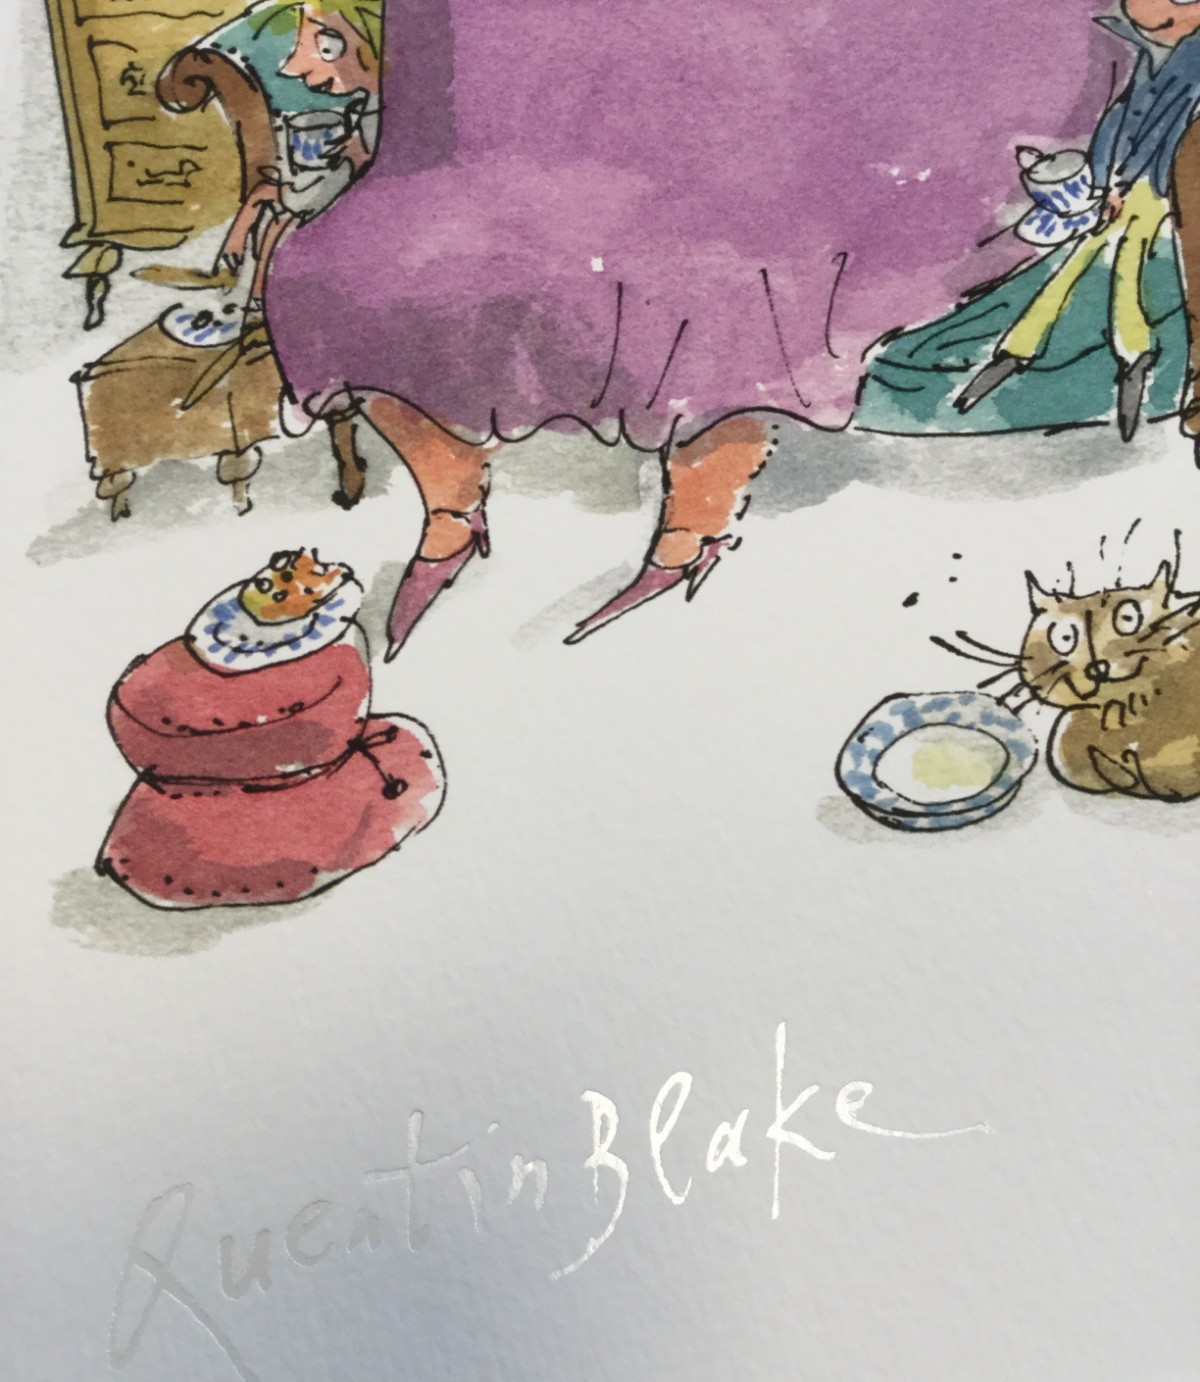 G is for Grandma by Quentin Blake, Children